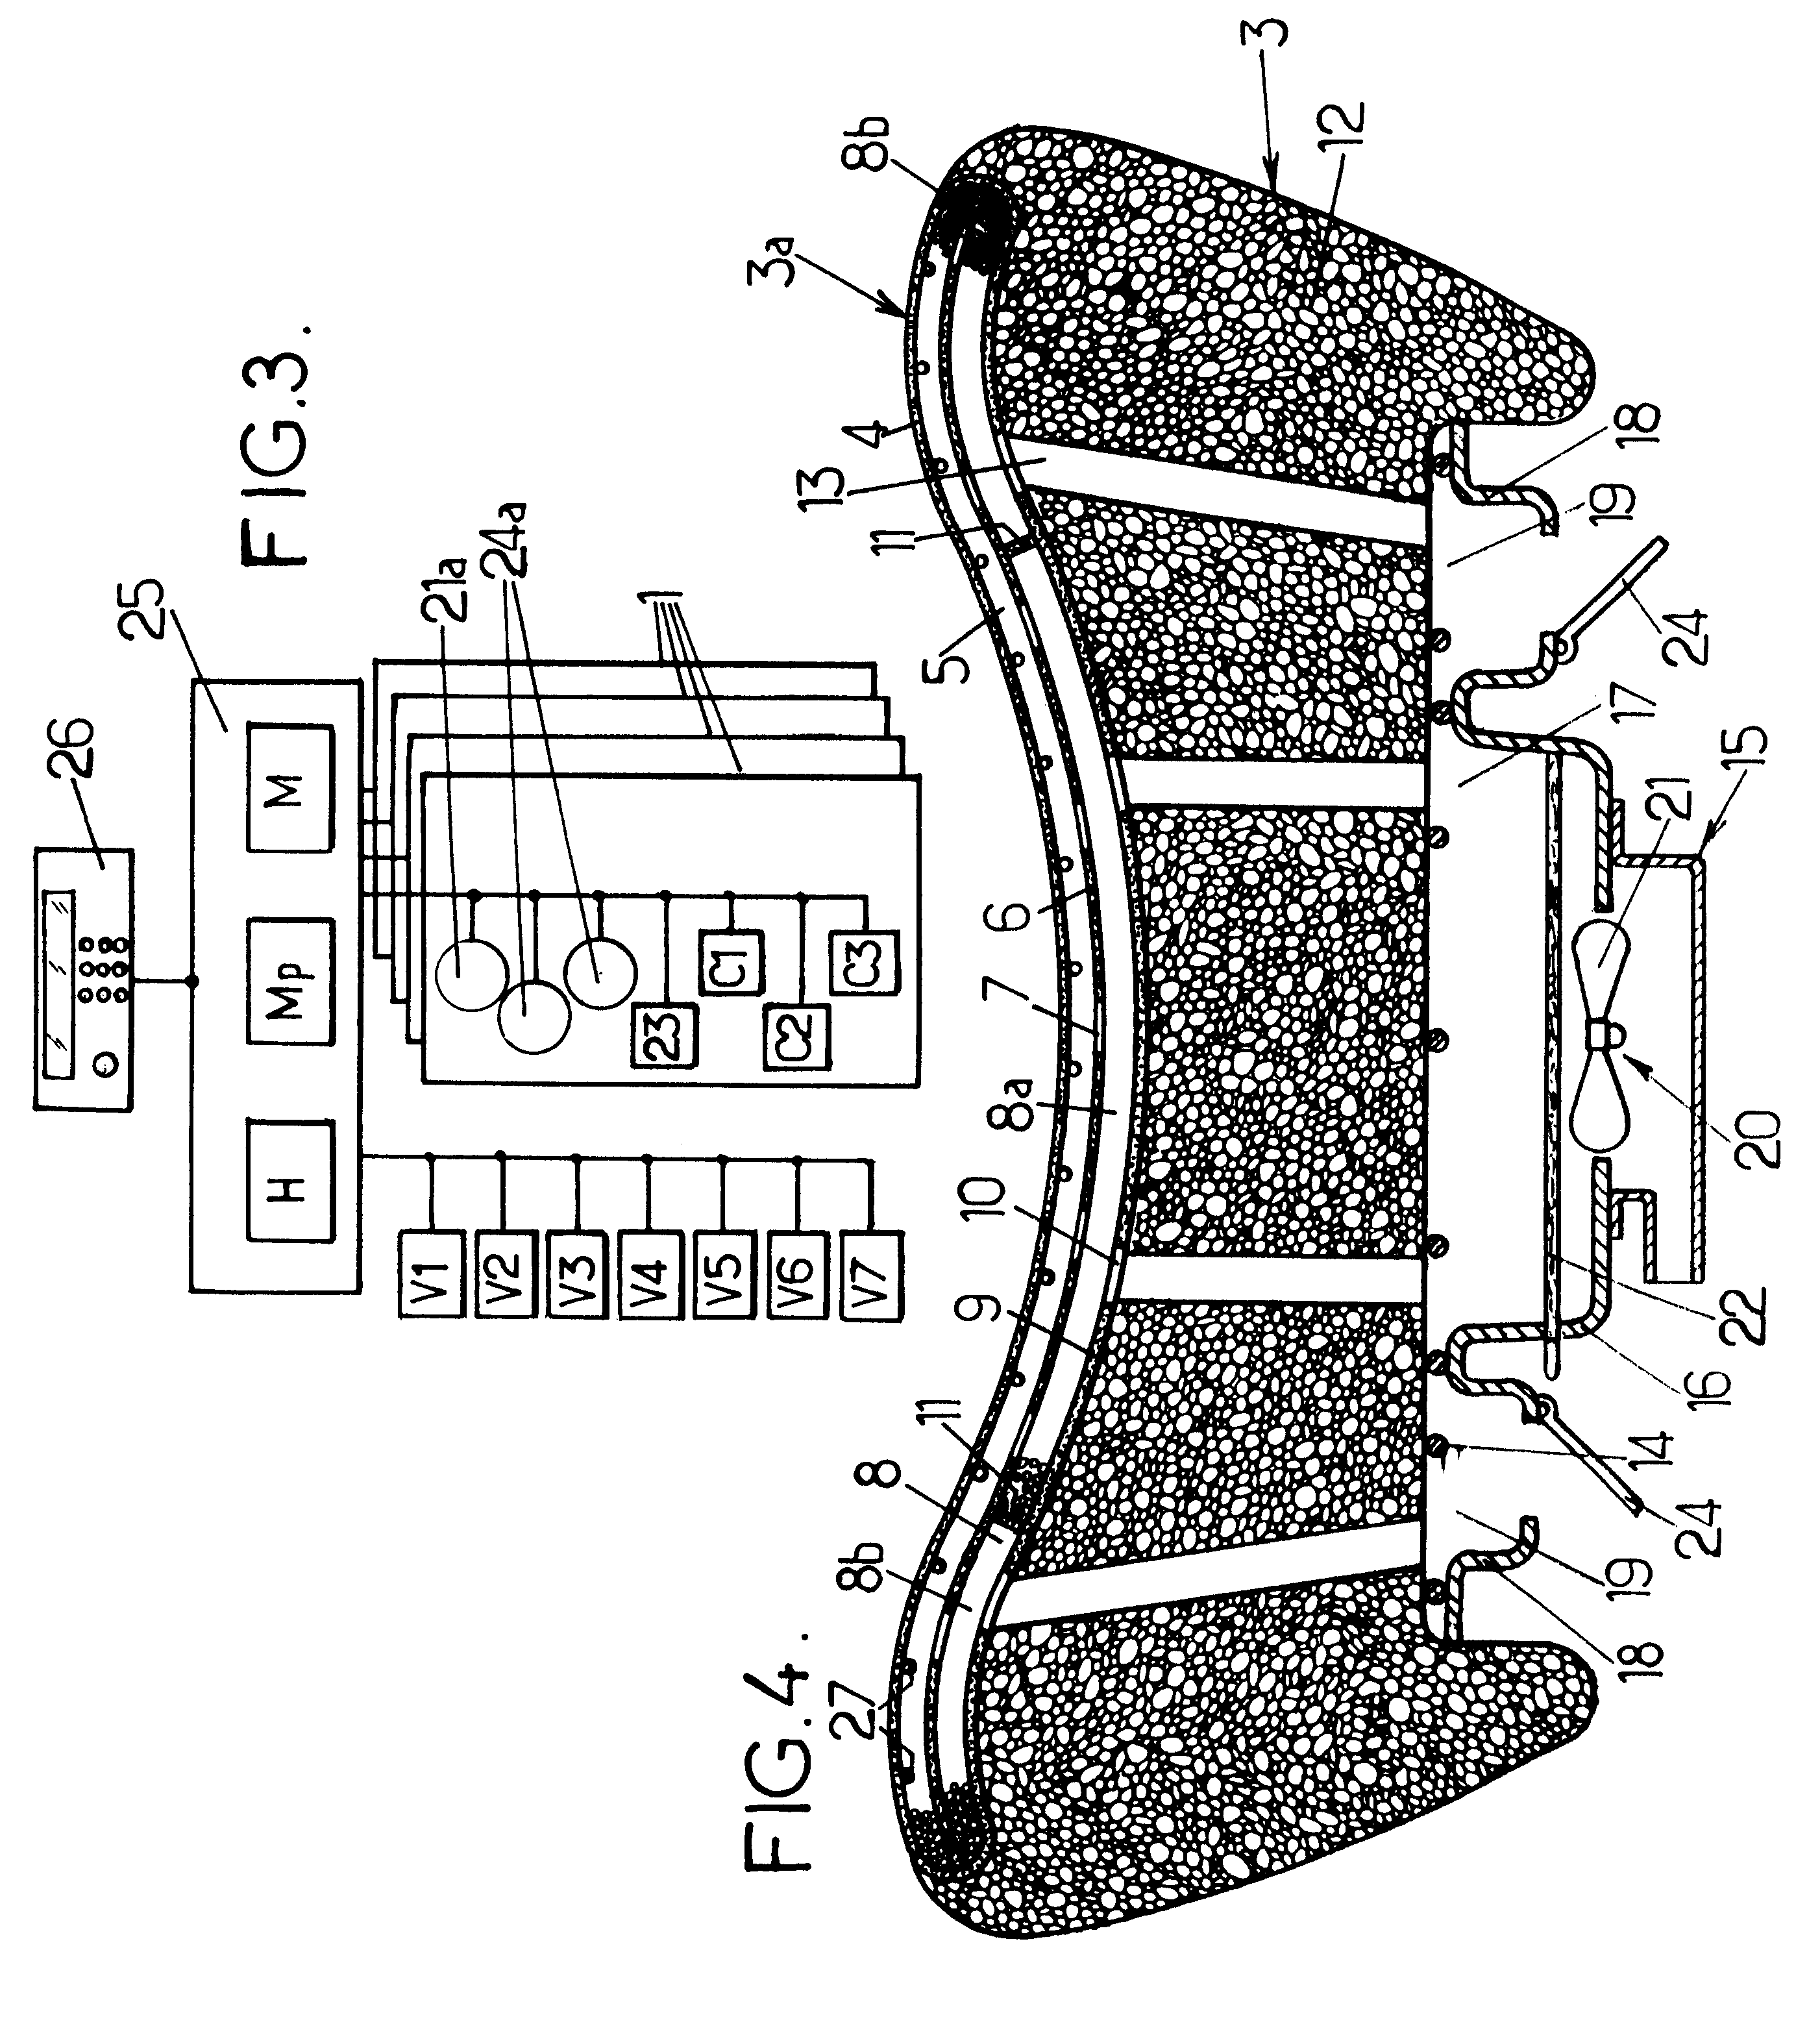 Method and system of regulating heat in a vehicle seat